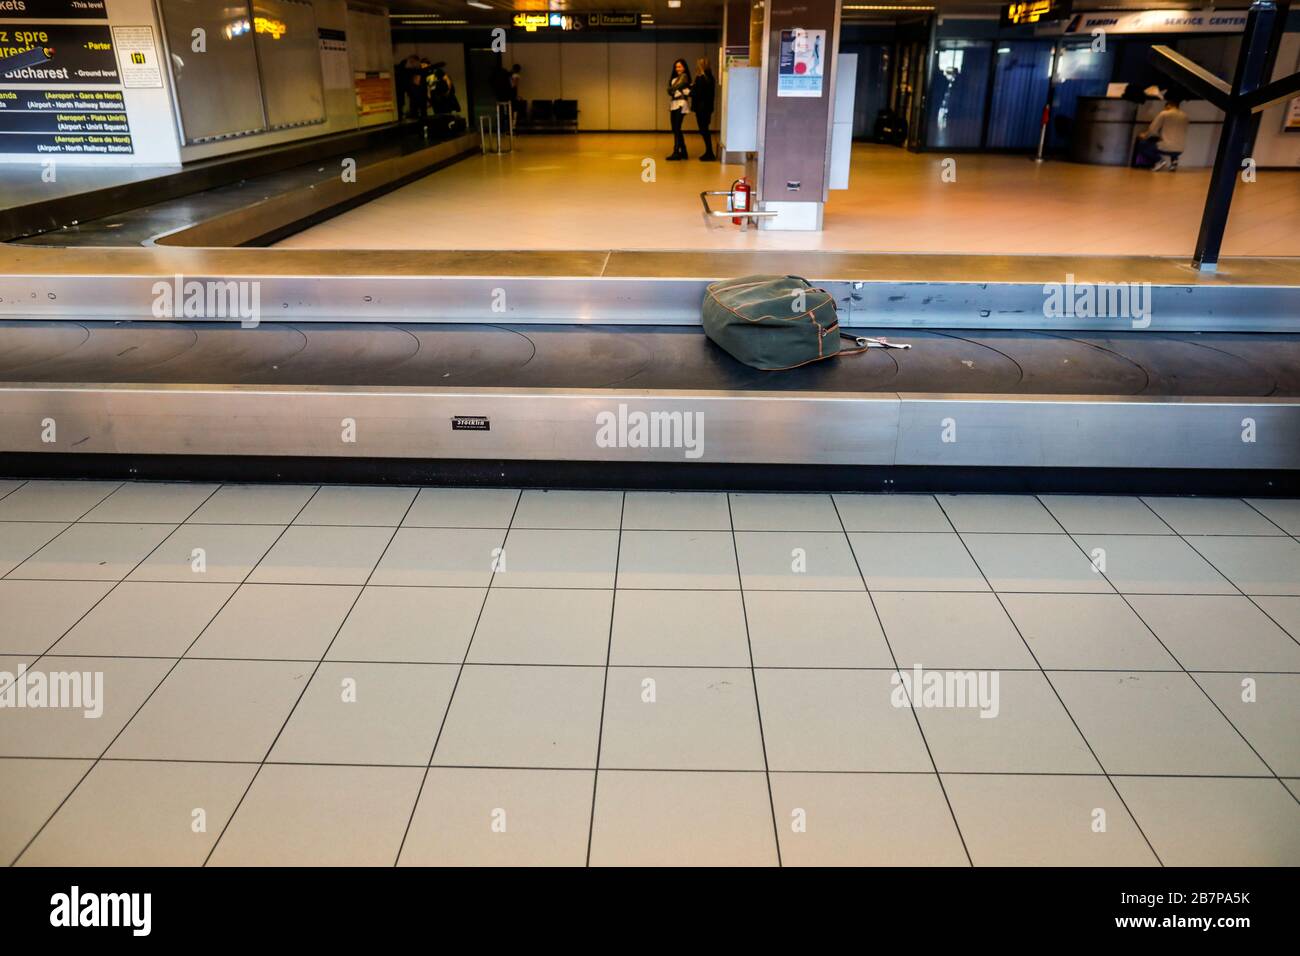 Otopeni, Romania - February 25, 2020: Luggage on the baggage carousel in an international airport. Stock Photo